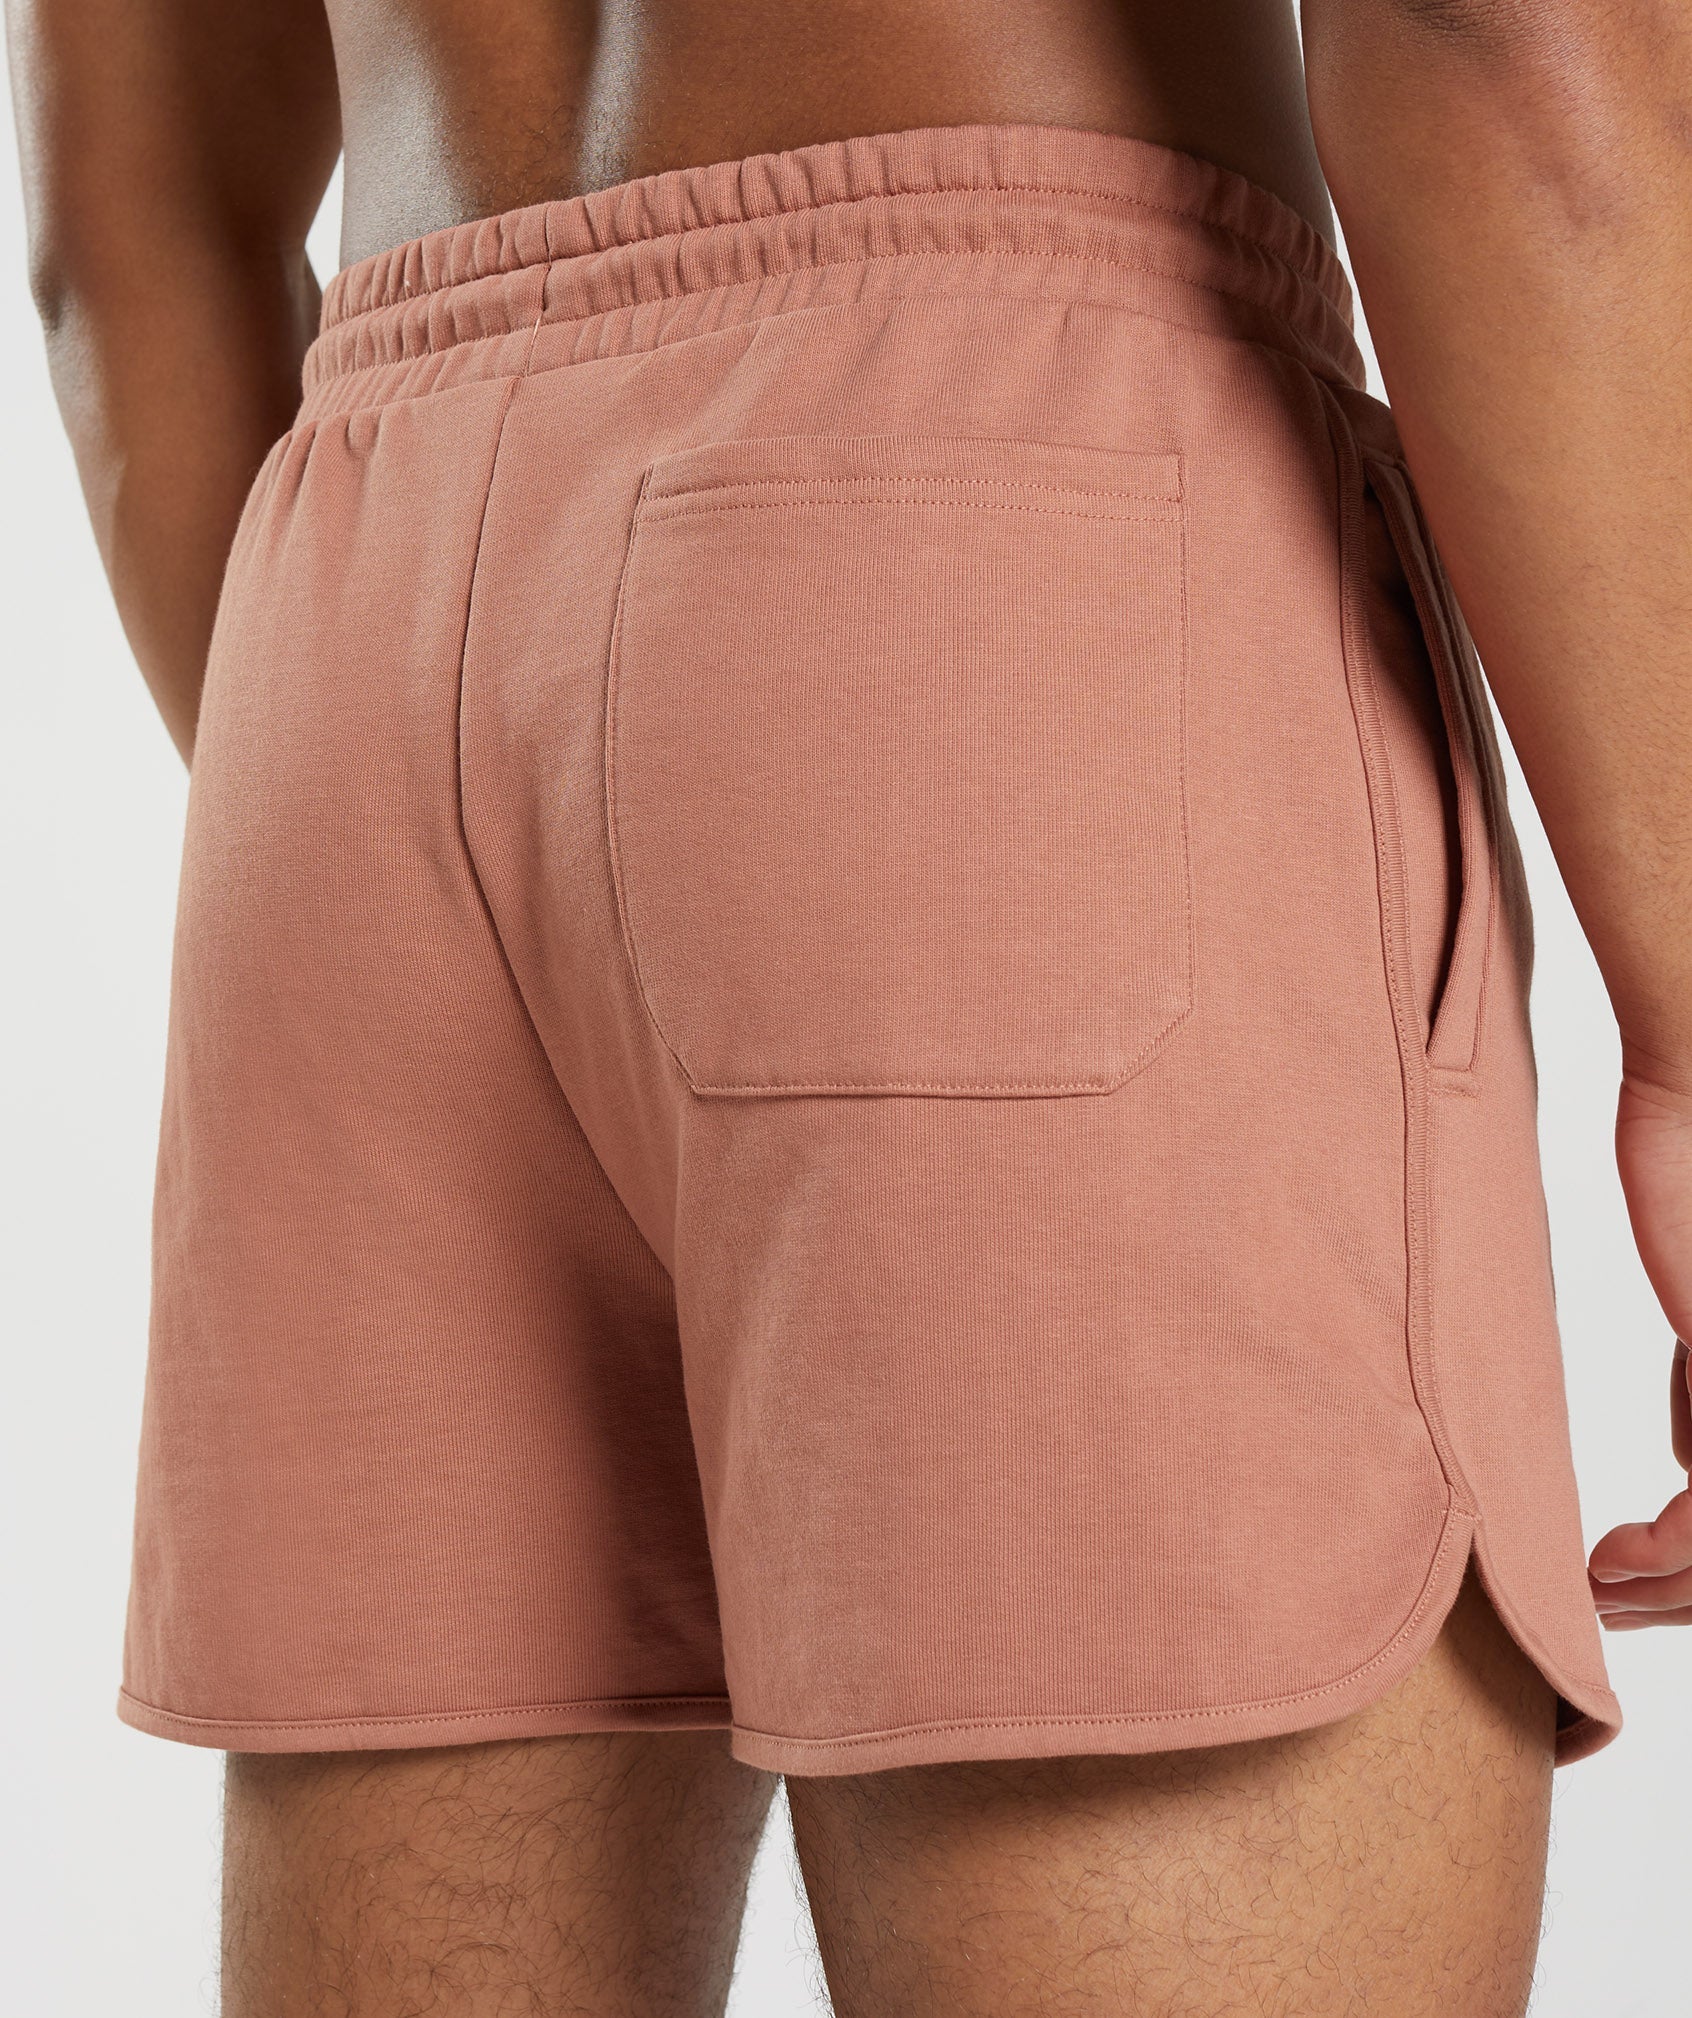 Rest Day Sweats 4'' Lounge Shorts in Toffee Brown - view 8